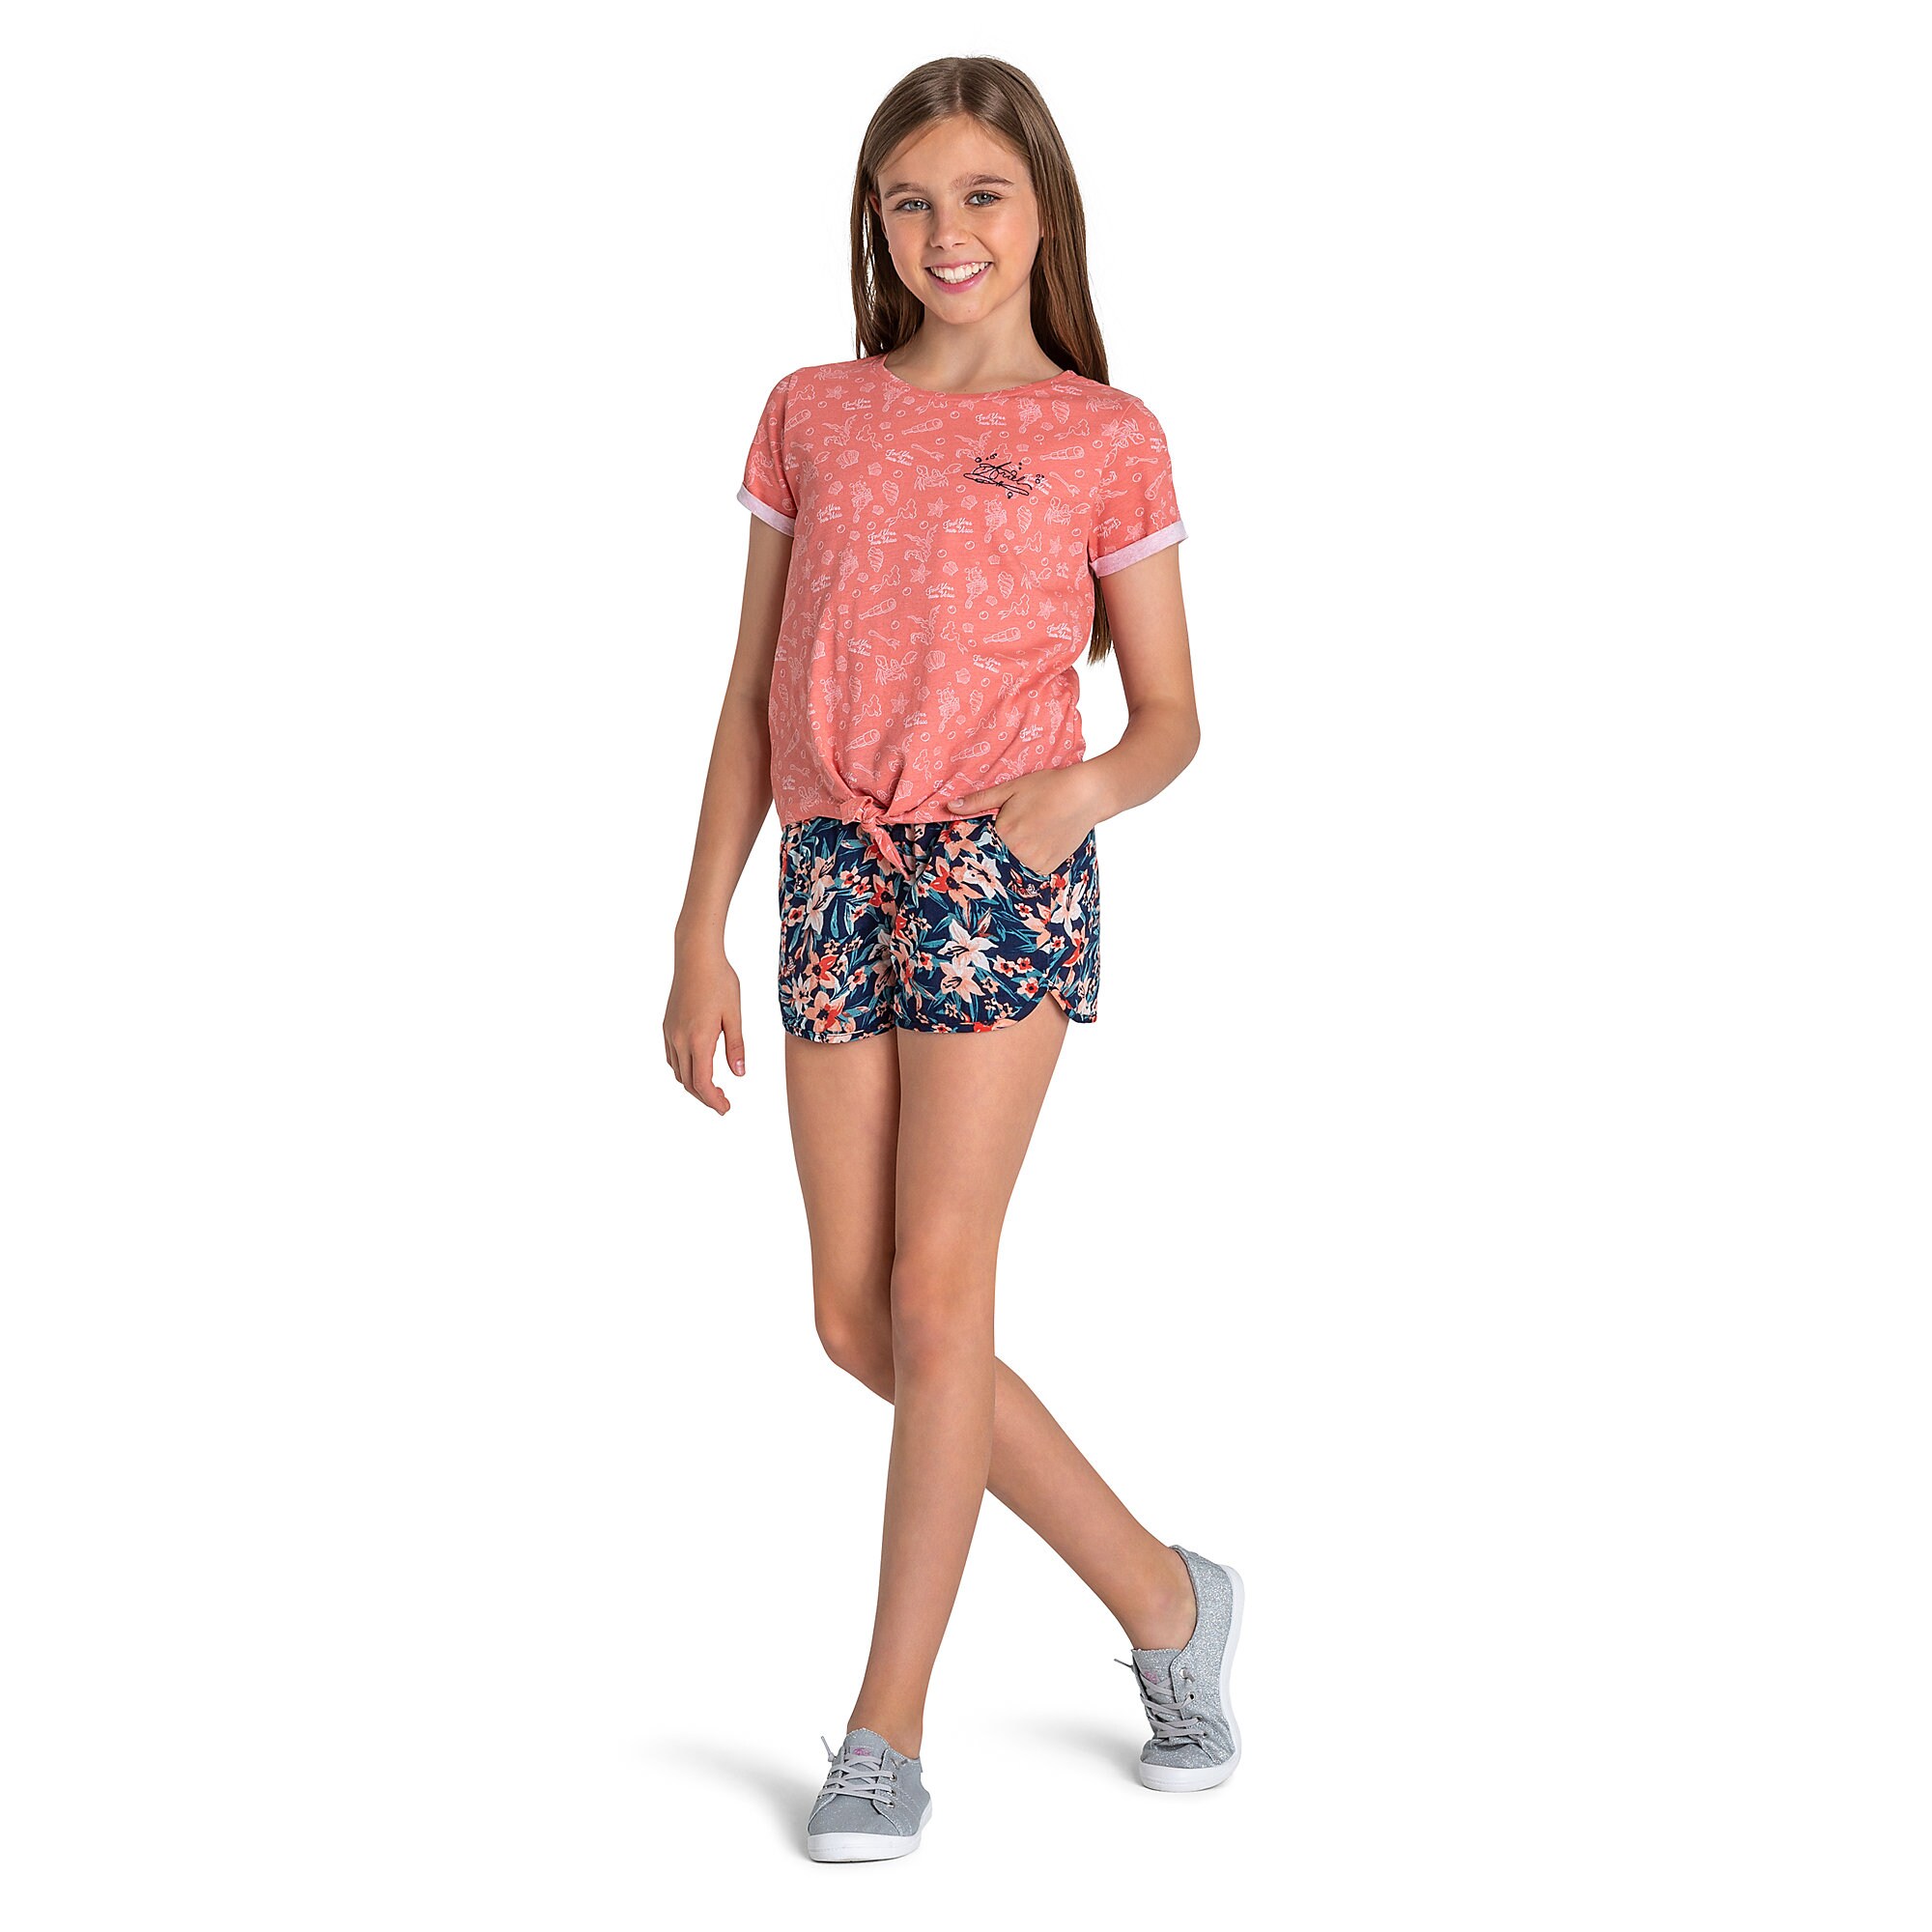 The Little Mermaid Knotted T-Shirt for Girls by ROXY Girl